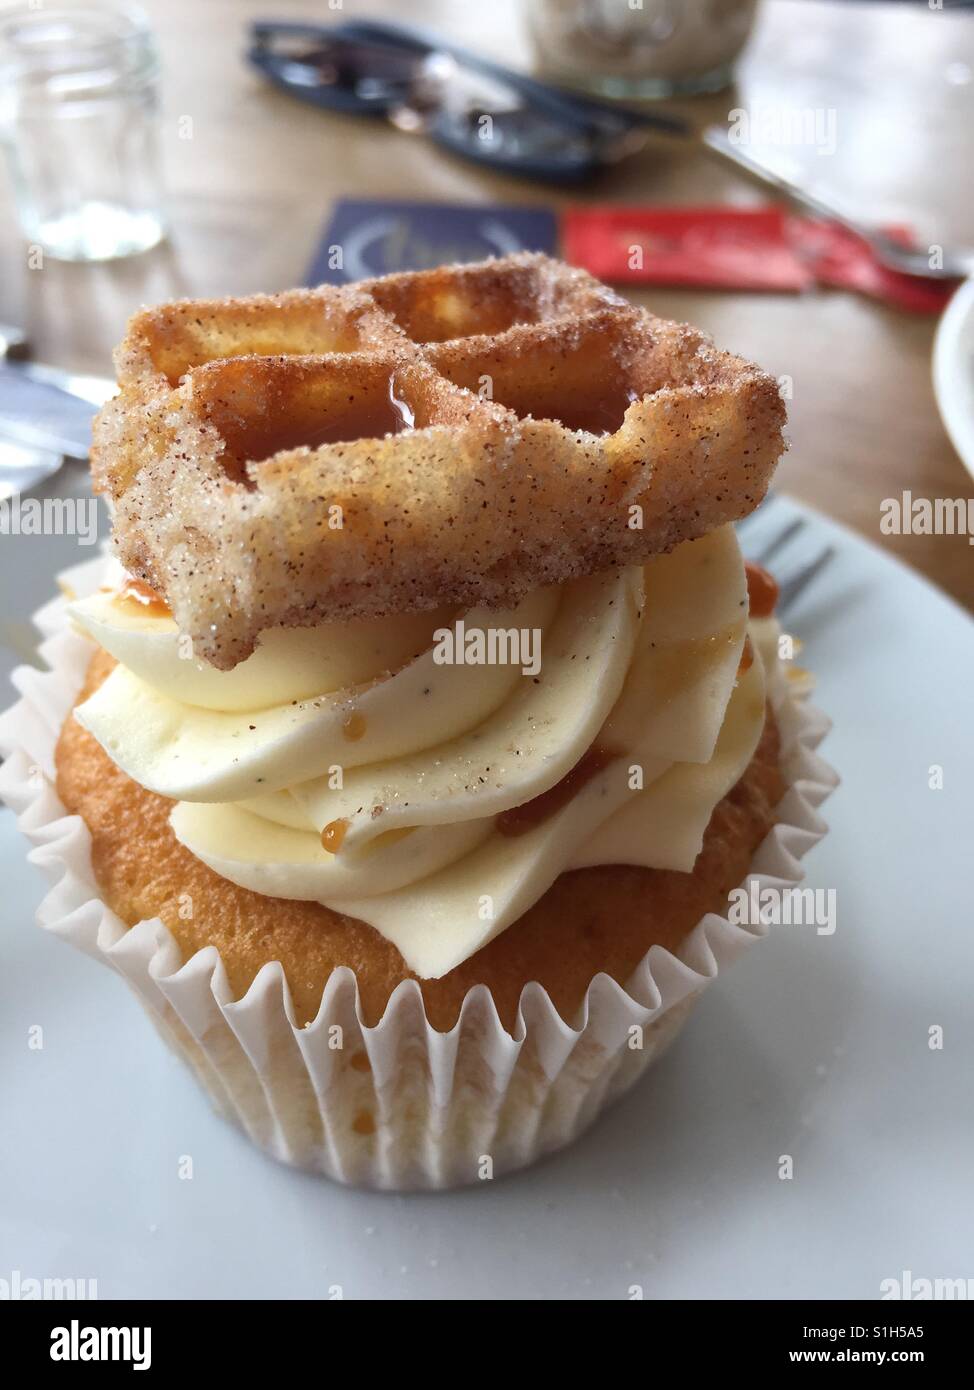 Cupcake with butter Icing. Stock Photo